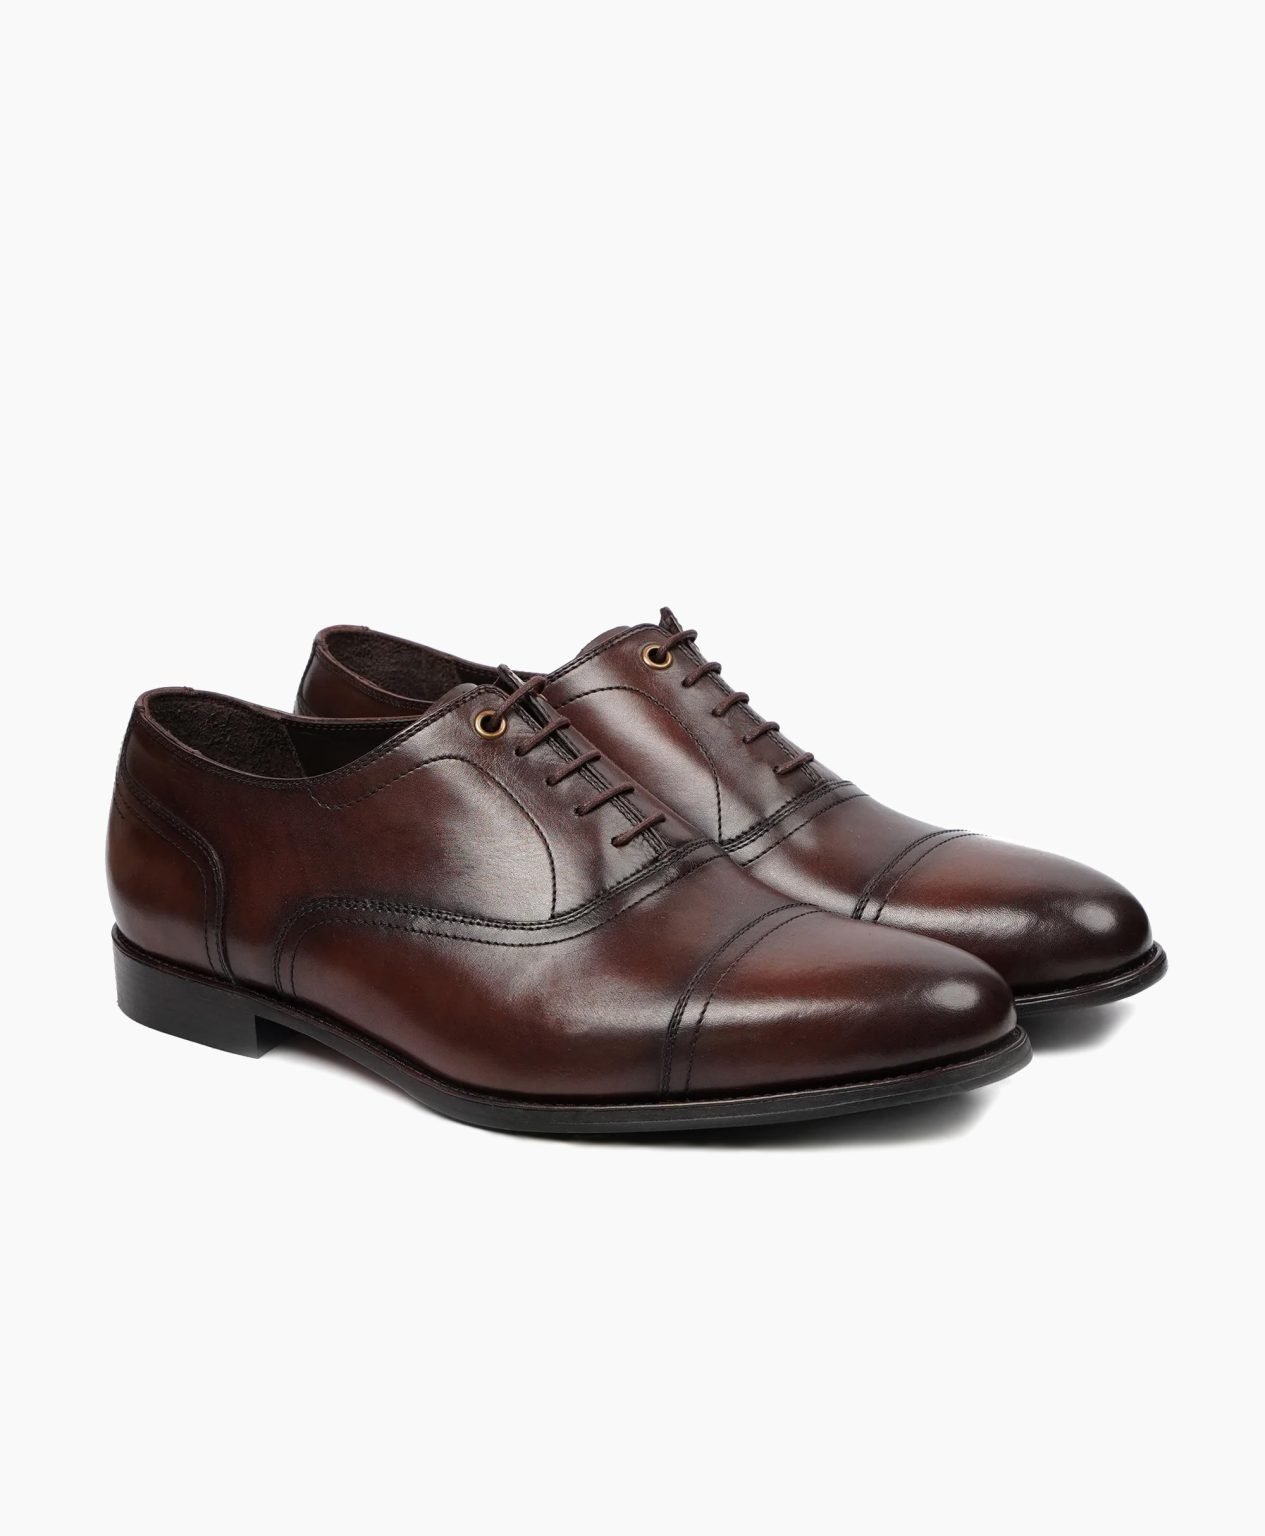 truro-oxford-dark-brown-leather-shoes-image200